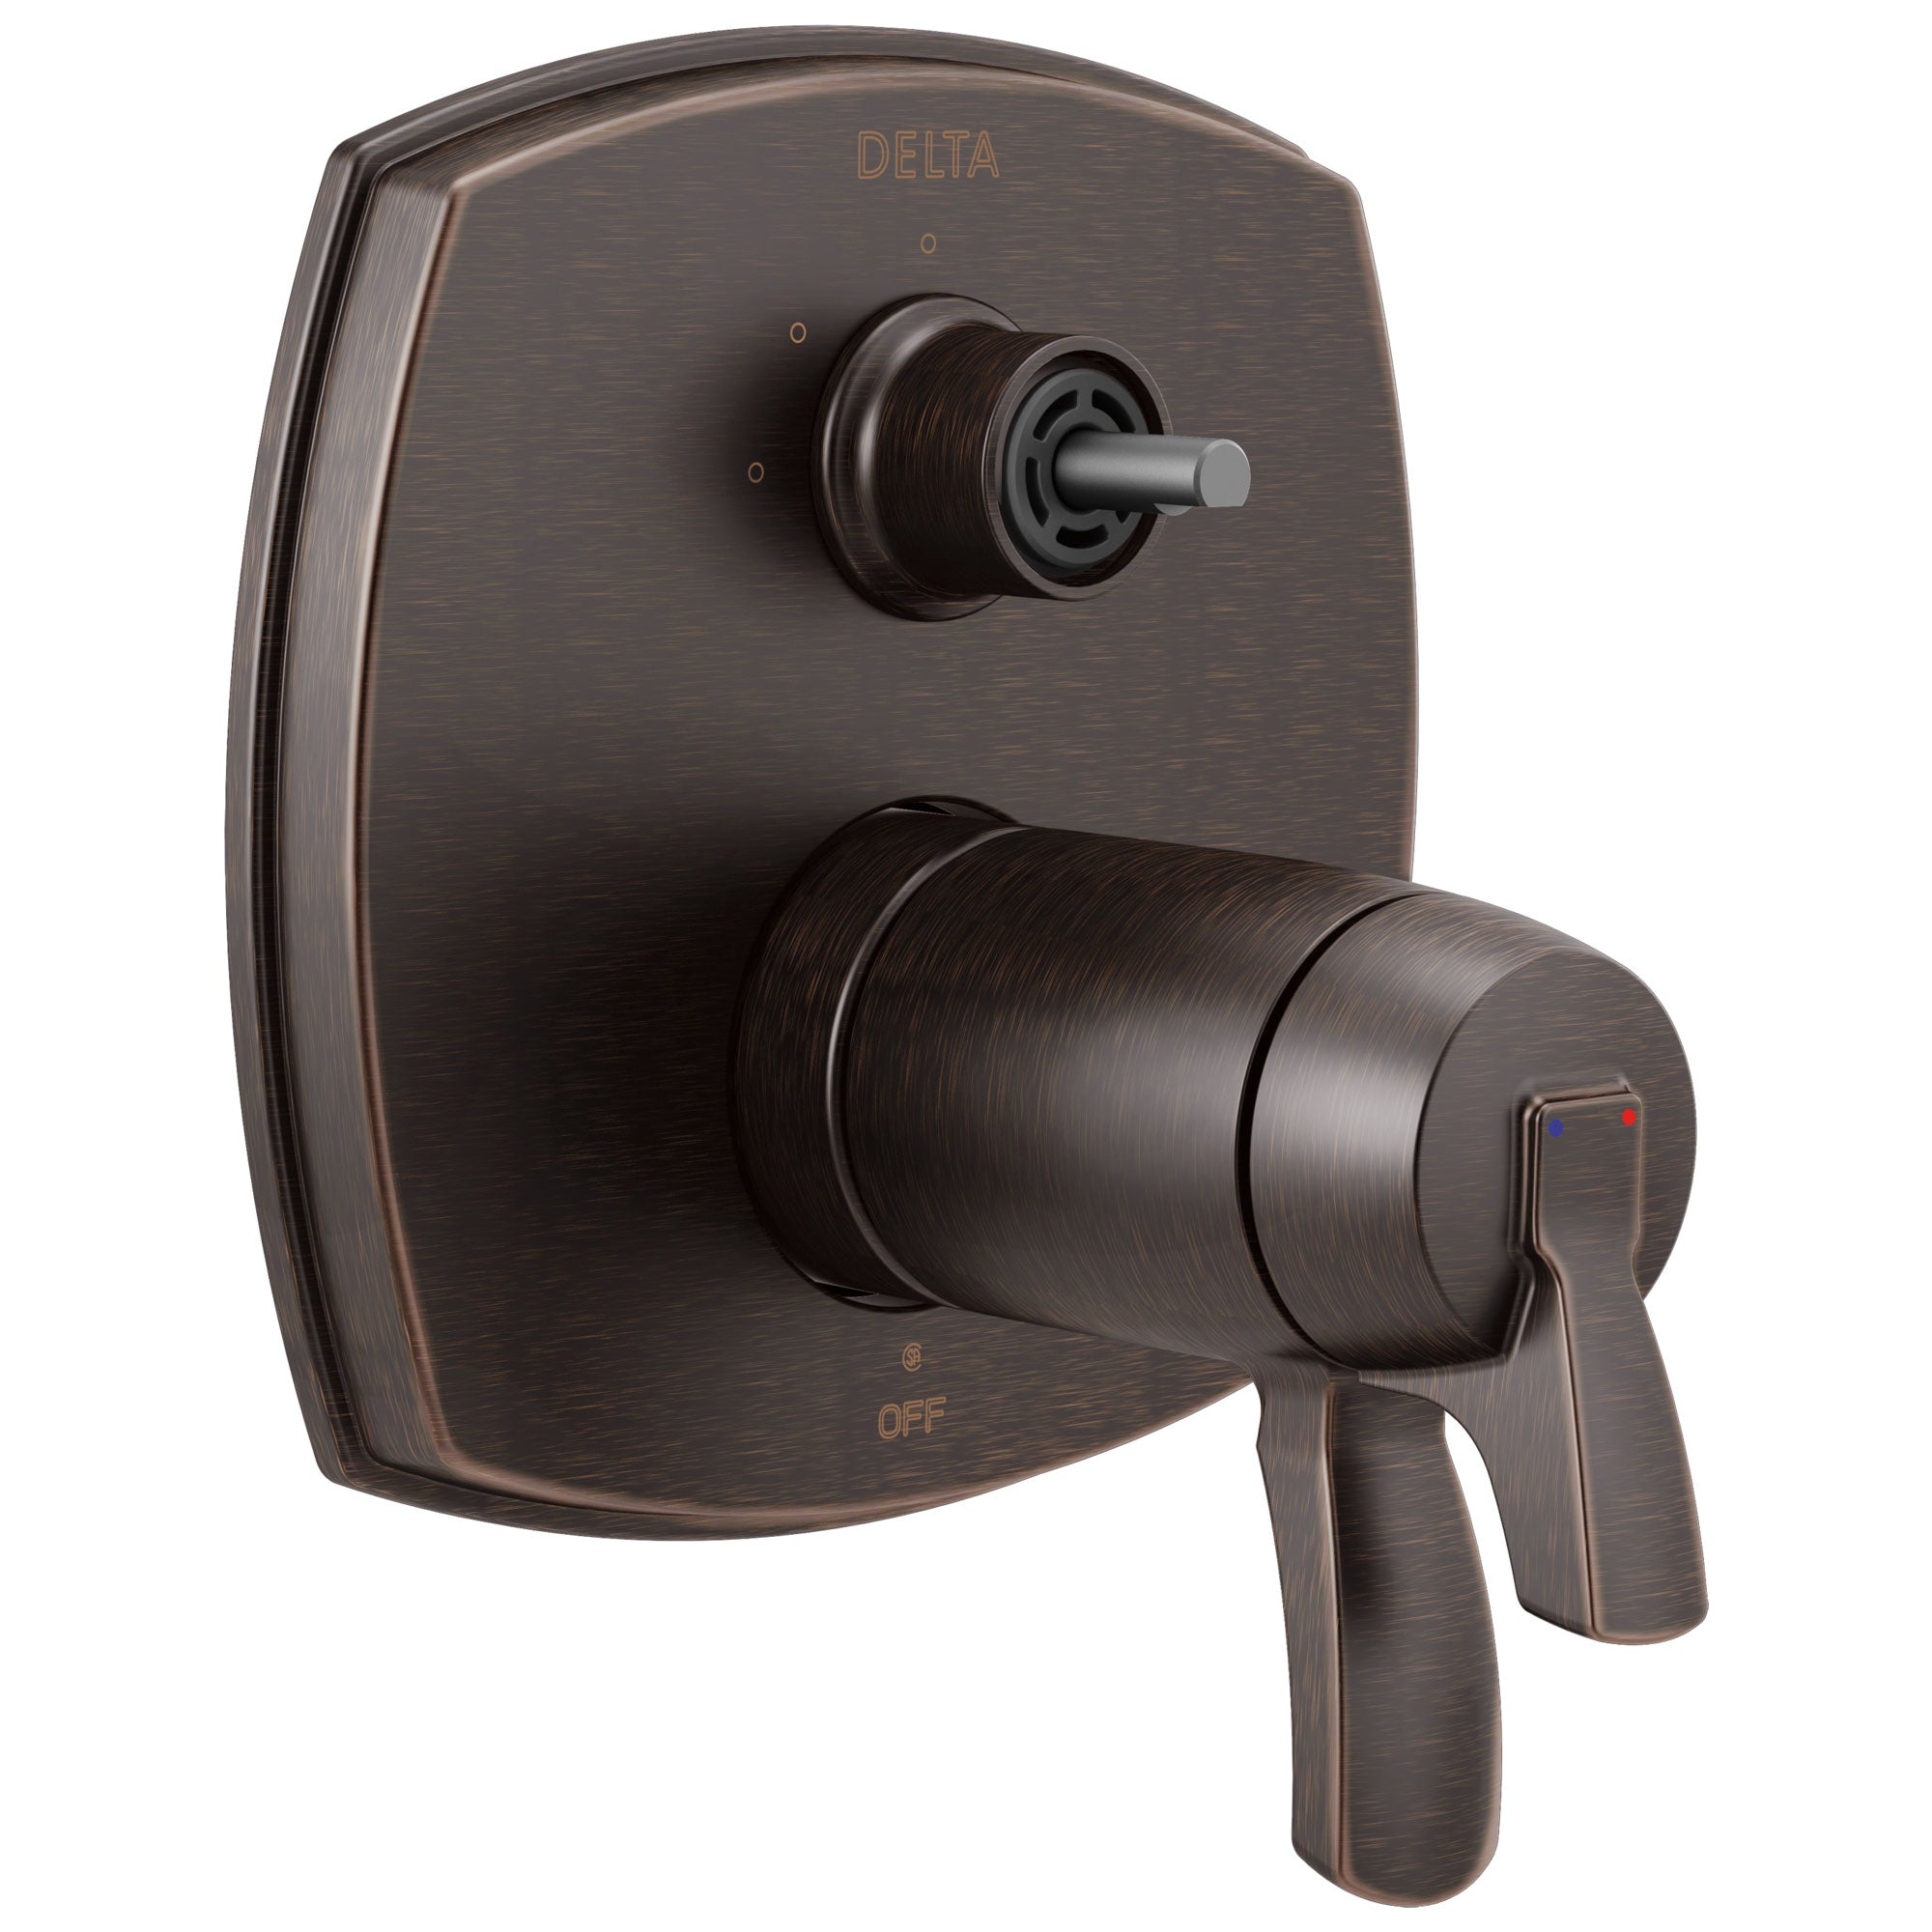 Delta Stryke Venetian Bronze Finish 17 Thermostatic Integrated Diverter Shower Control Trim Kit with Three Function Diverter Less Diverter Handle (Requires Valve) DT27T876RBLHP